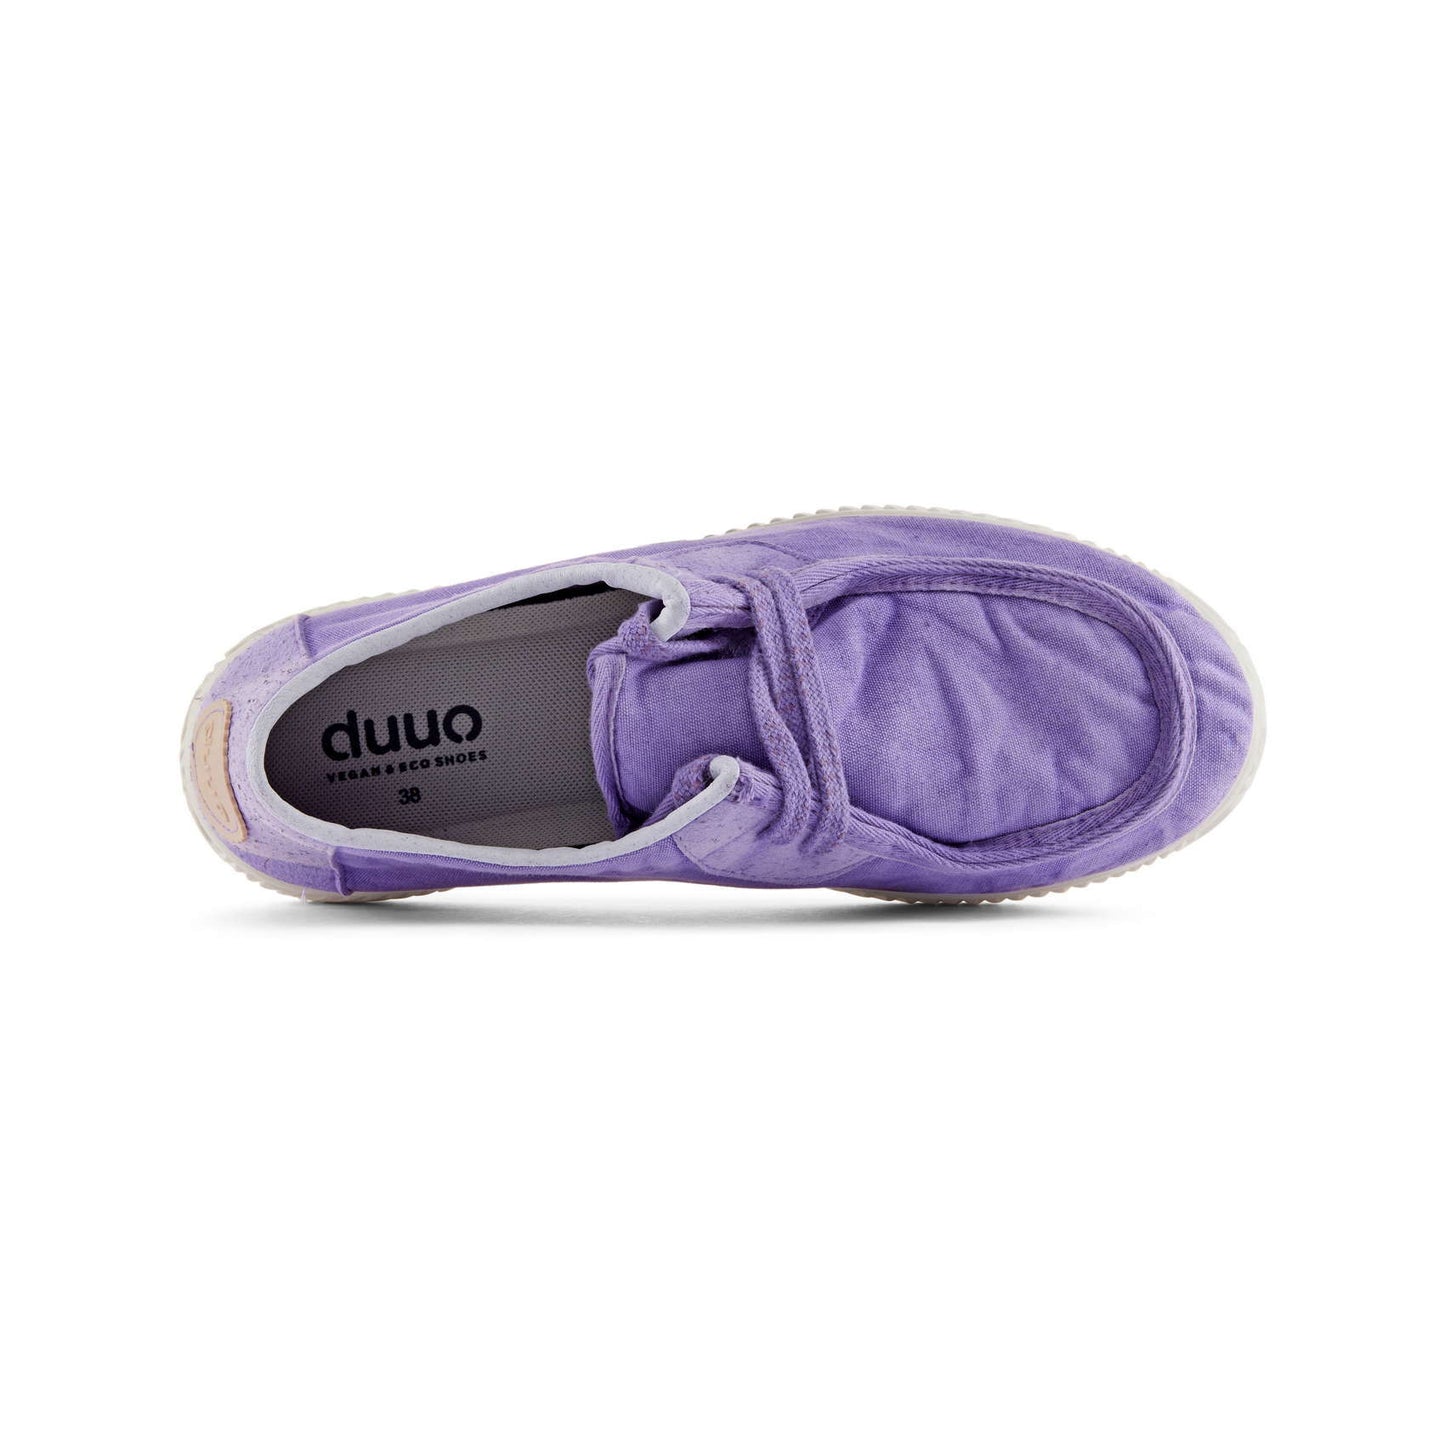 DUUO | SNEAKERS VOOR VROUWEN | ONA WALABY WASHED 050 VIOLET 78) |